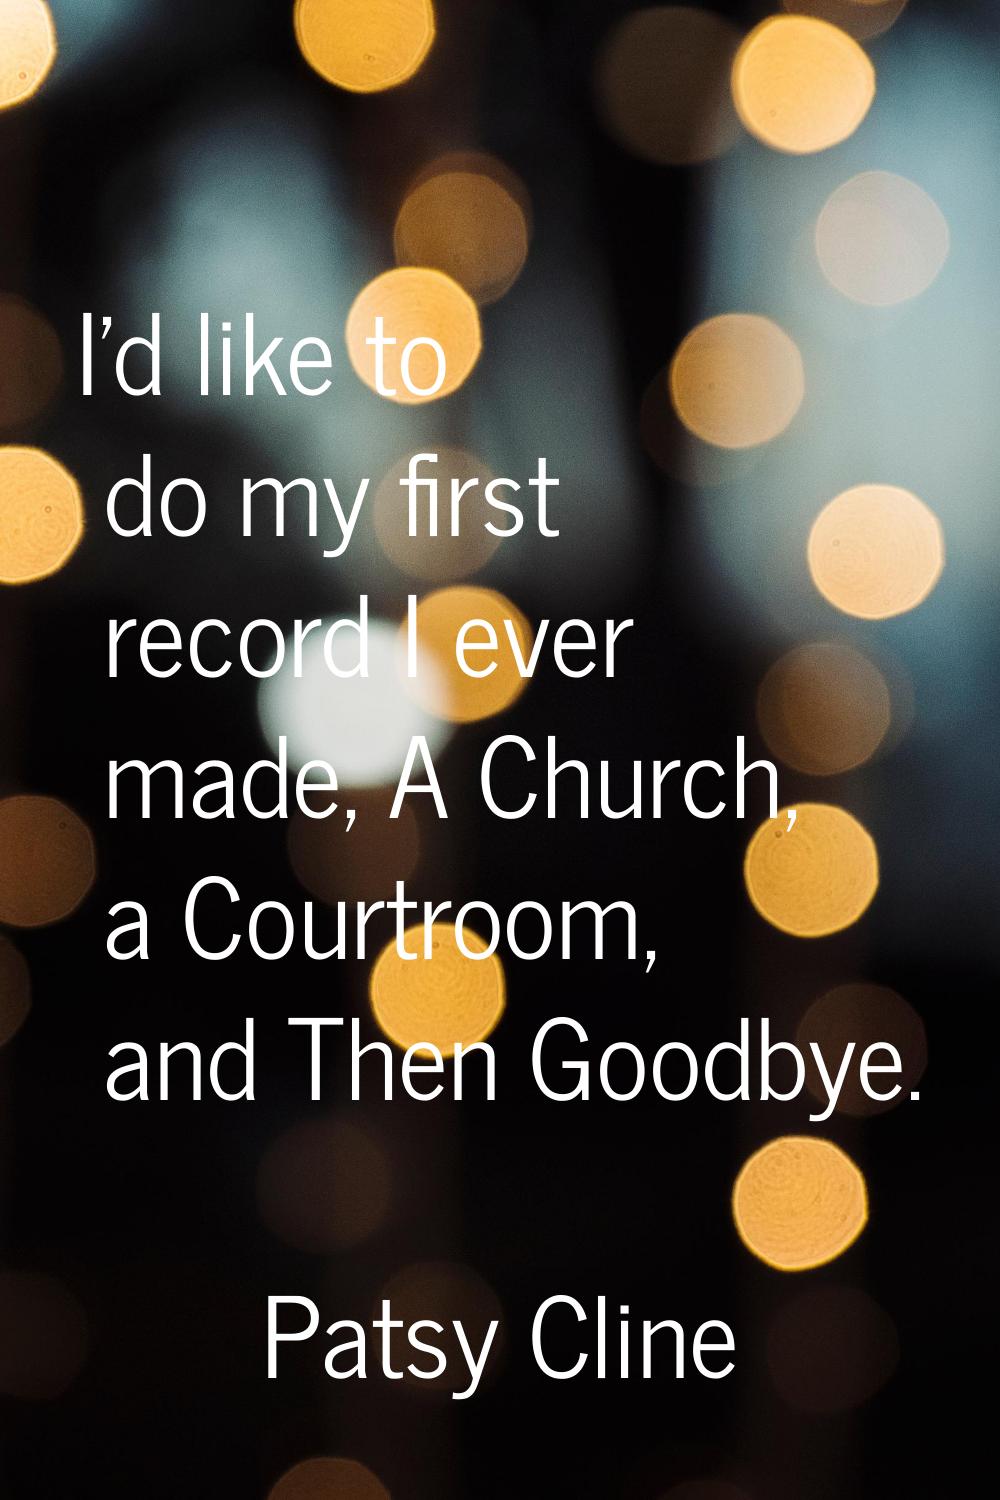 I'd like to do my first record I ever made, A Church, a Courtroom, and Then Goodbye.